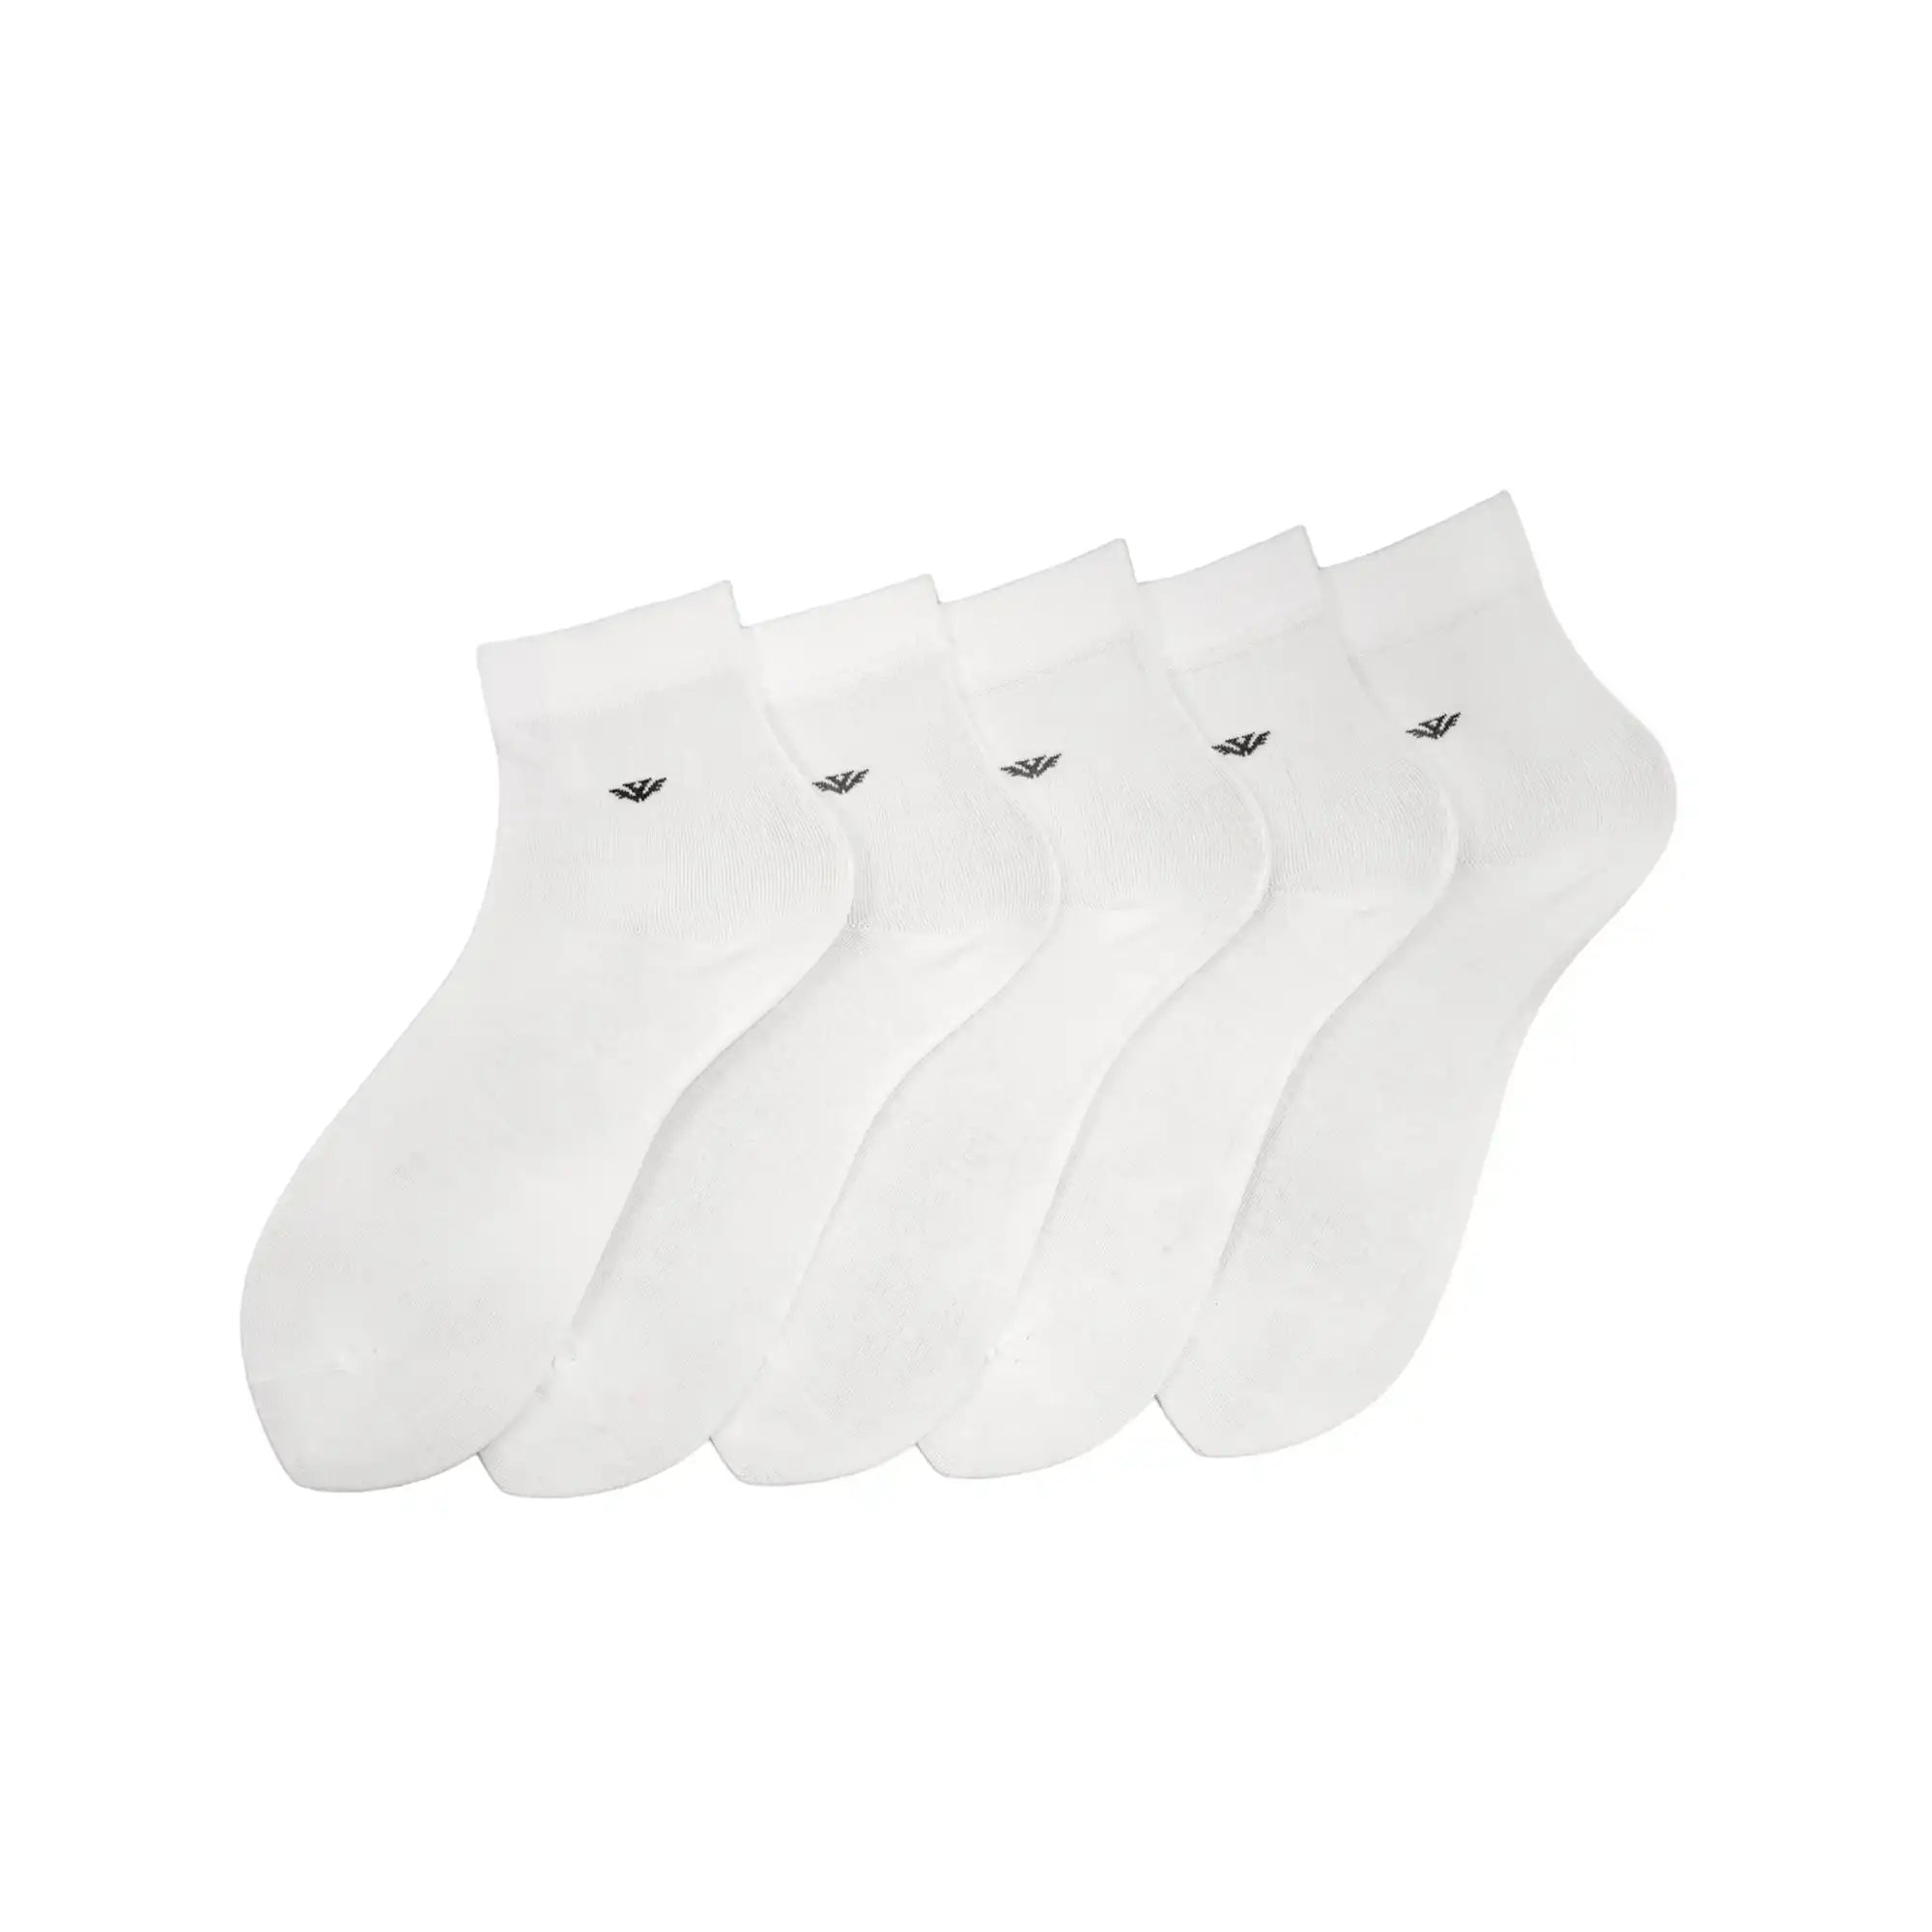 Young Wings Men's White Colour Cotton Fabric Solid Ankle Length Socks - Pack of 5, Style no. 2400-M1